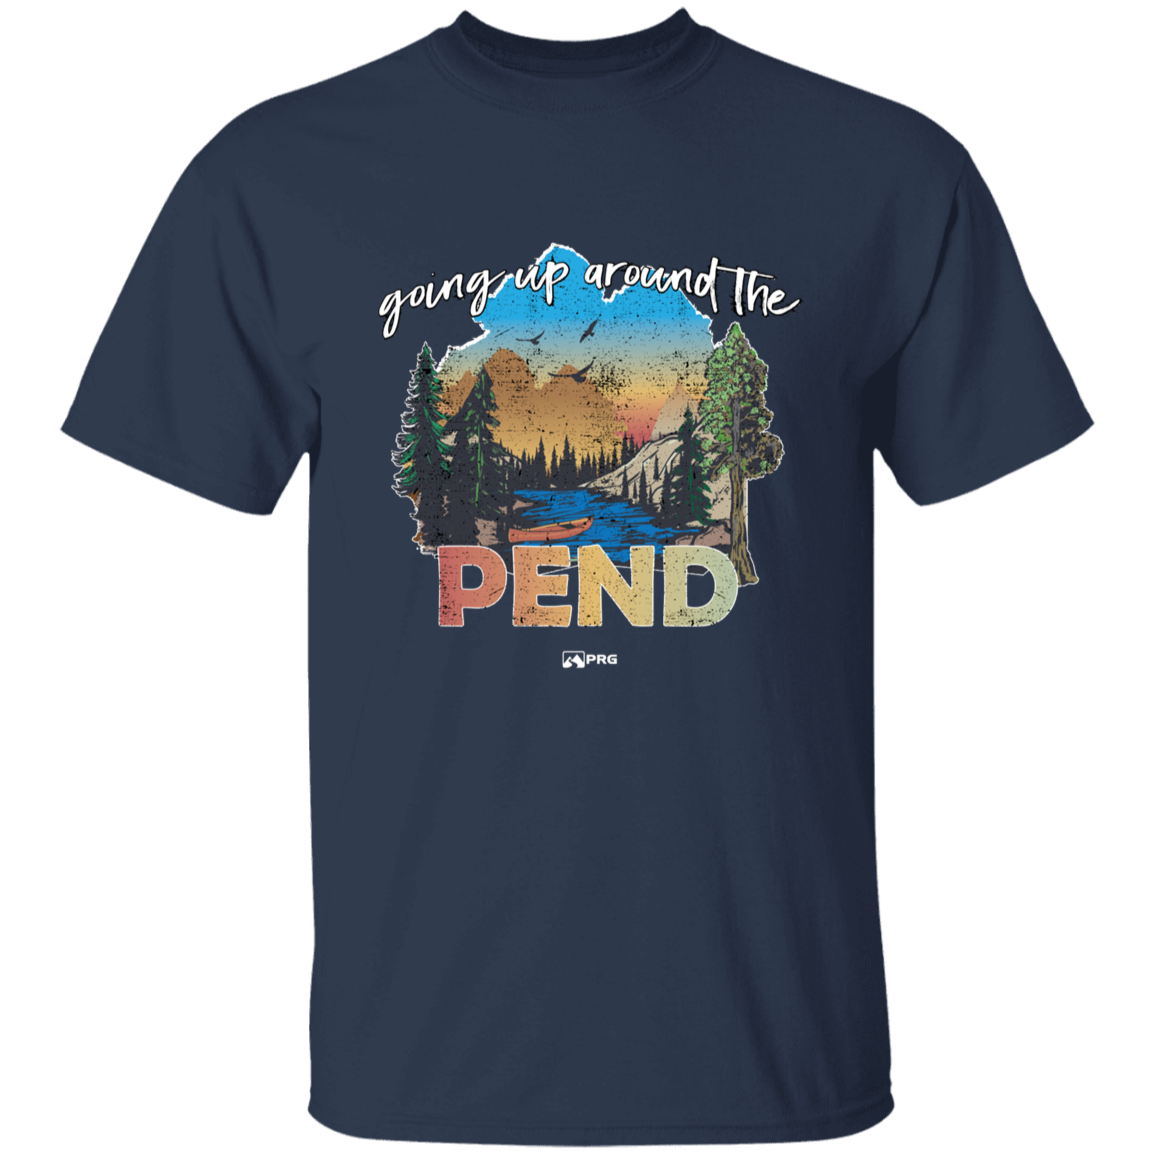 Around the Pend - Youth Shirt